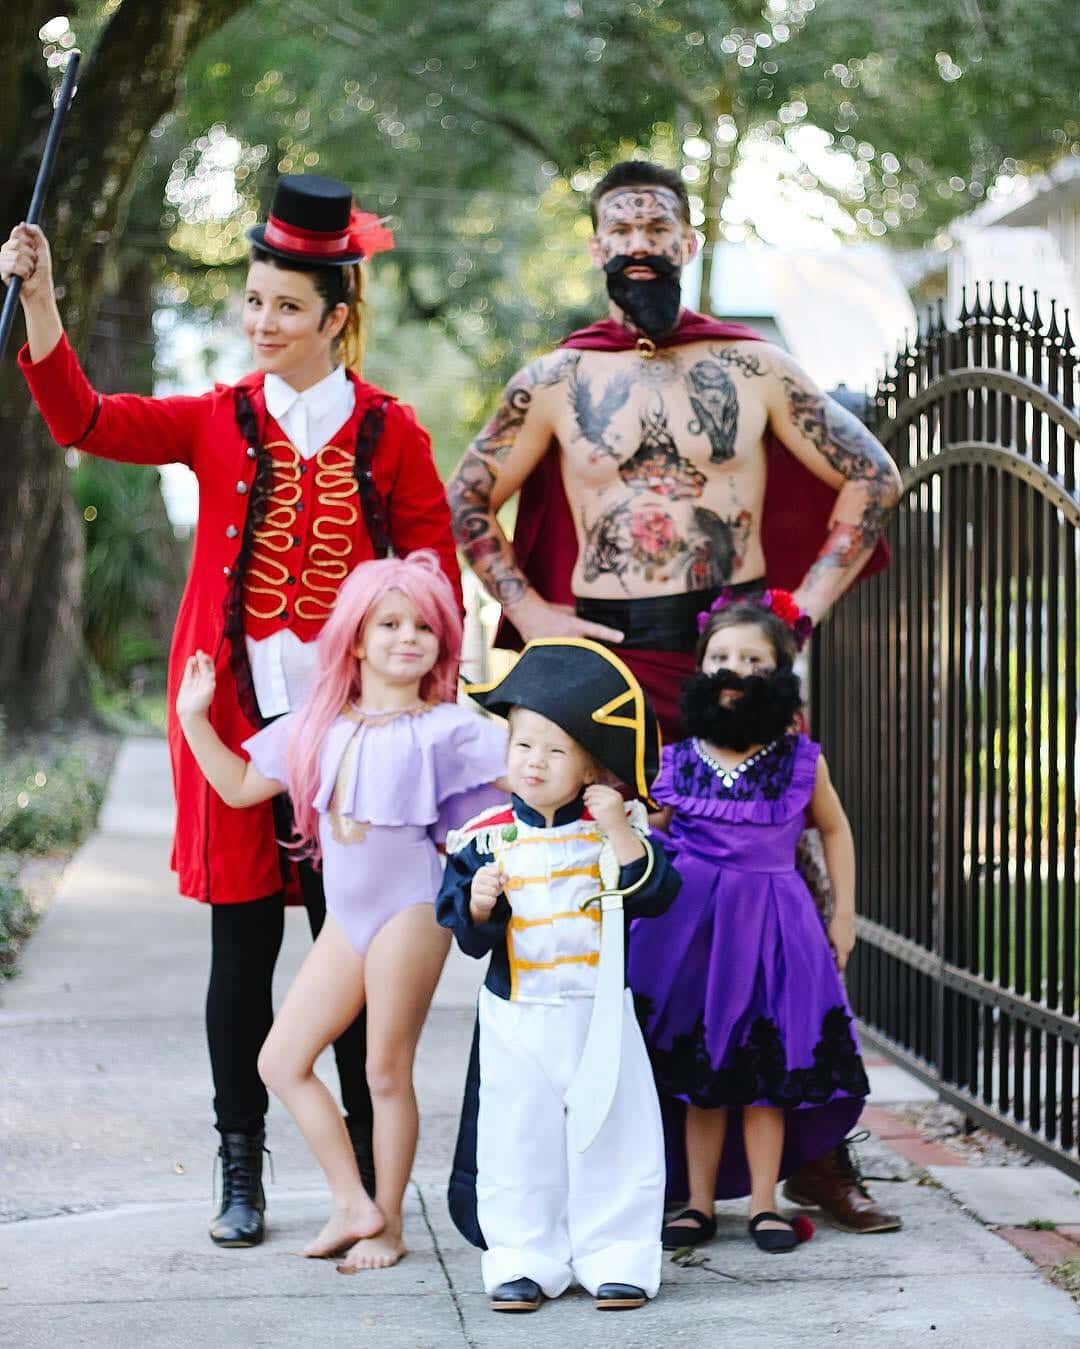 20 DIY Circus Costume Ideas for Family This Halloween  Circus costume,  Circus party costume, Circus halloween costumes